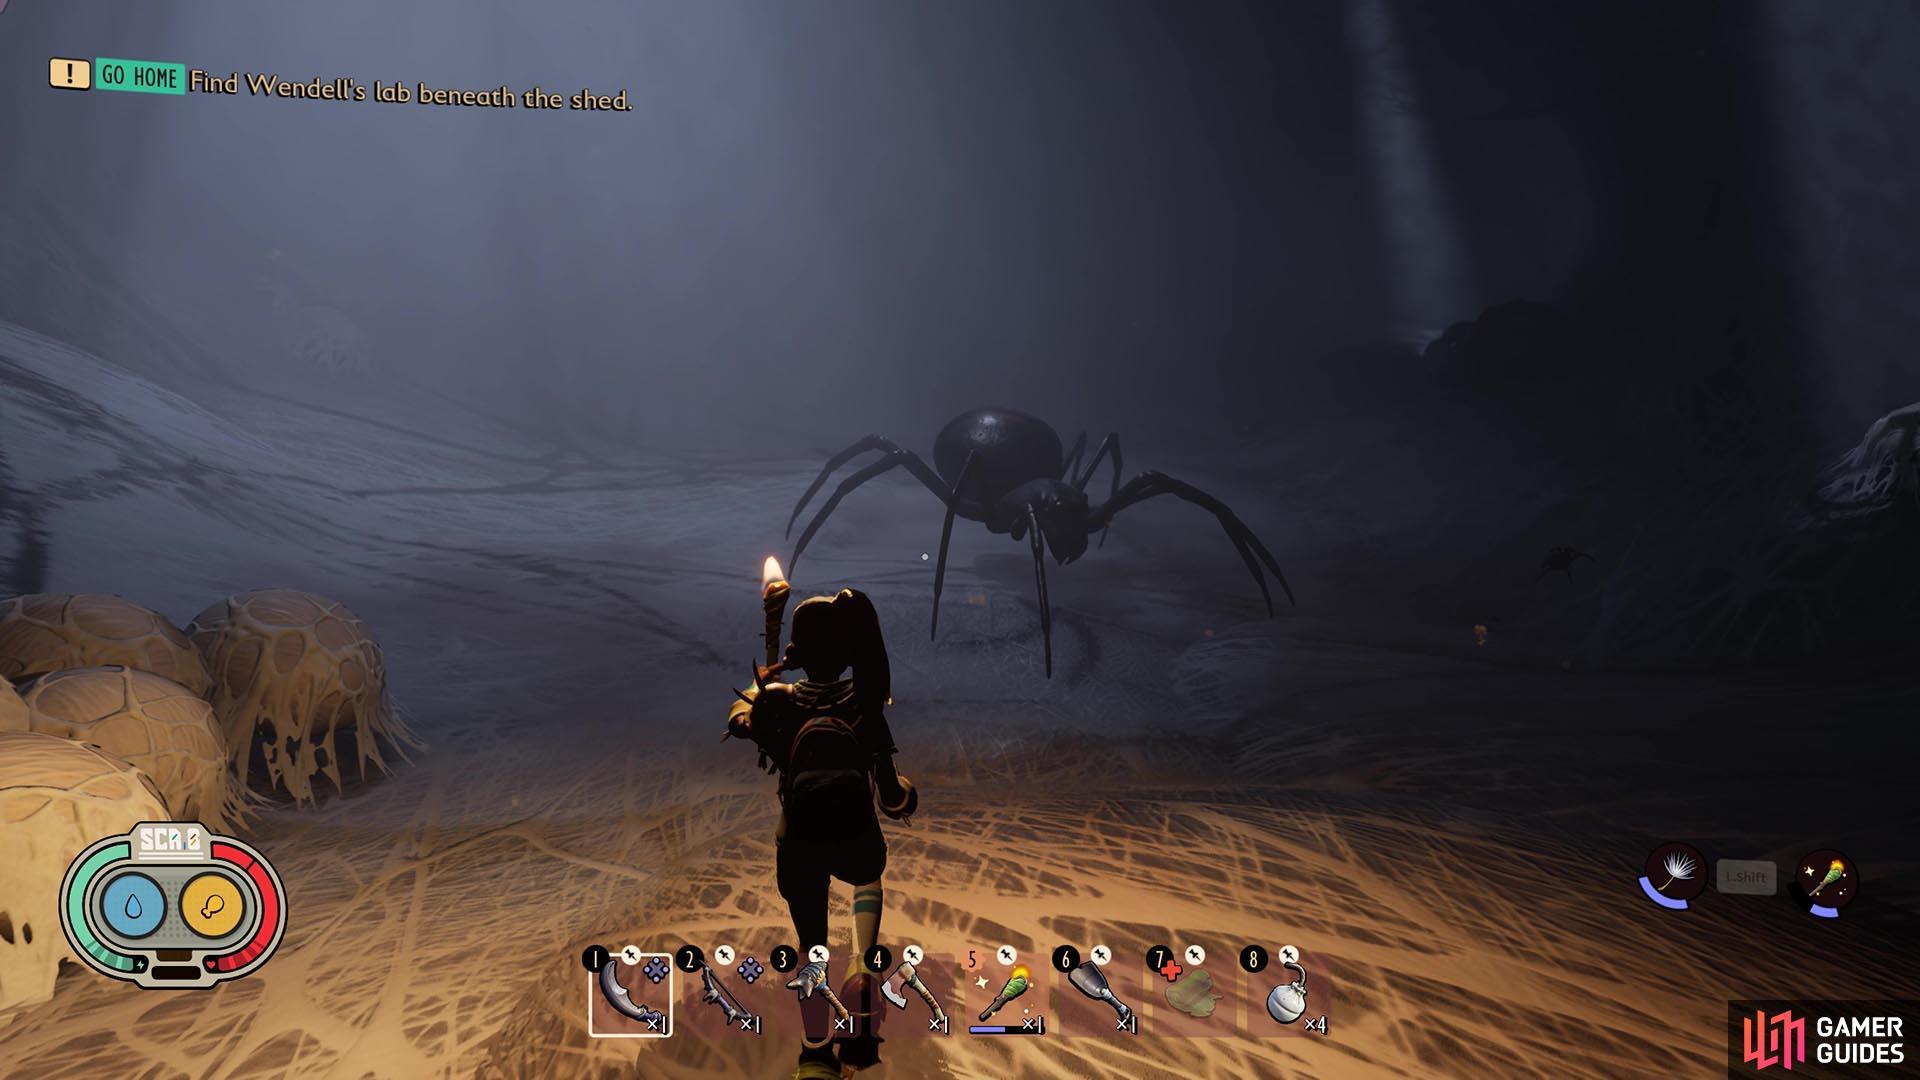 Here is what the lair looks like in the Undershed black widow location.